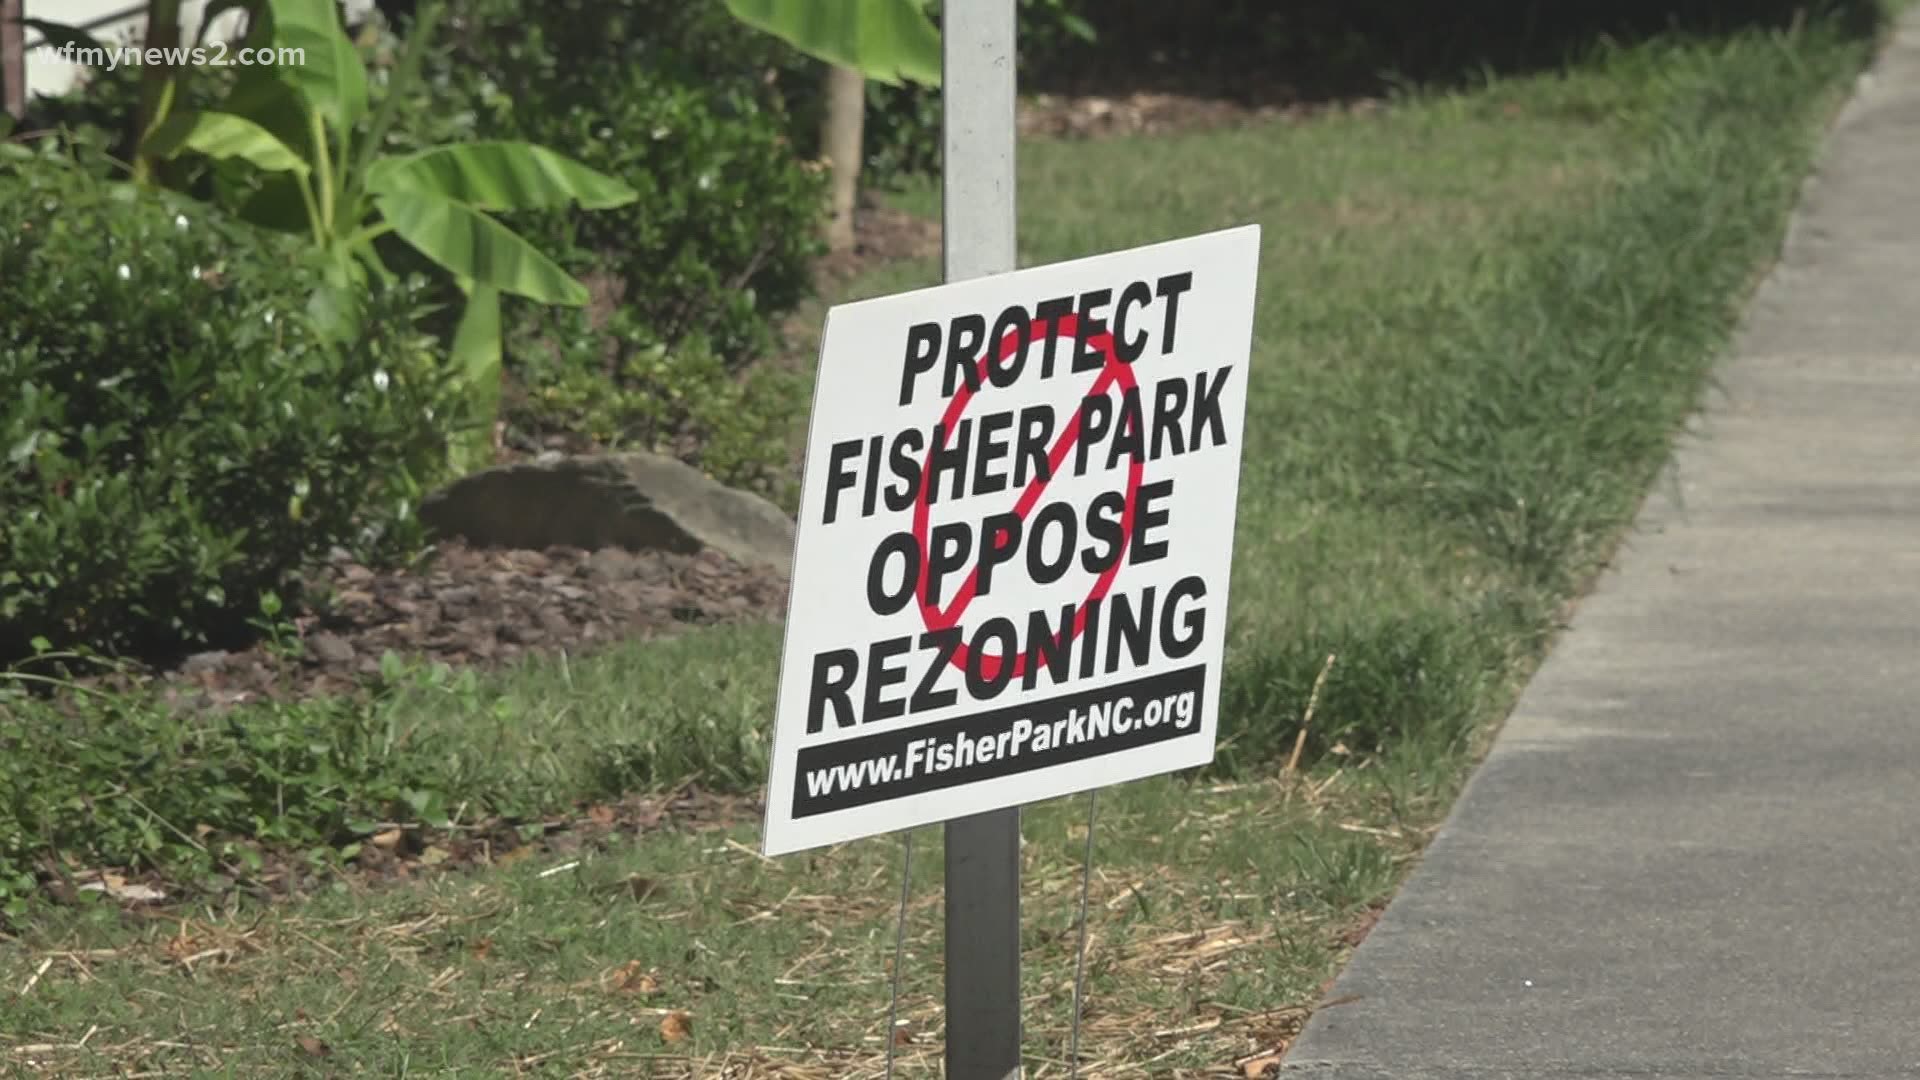 Residents in the Fisher Park area don't want a building in the area to be rezoned for commercial use.